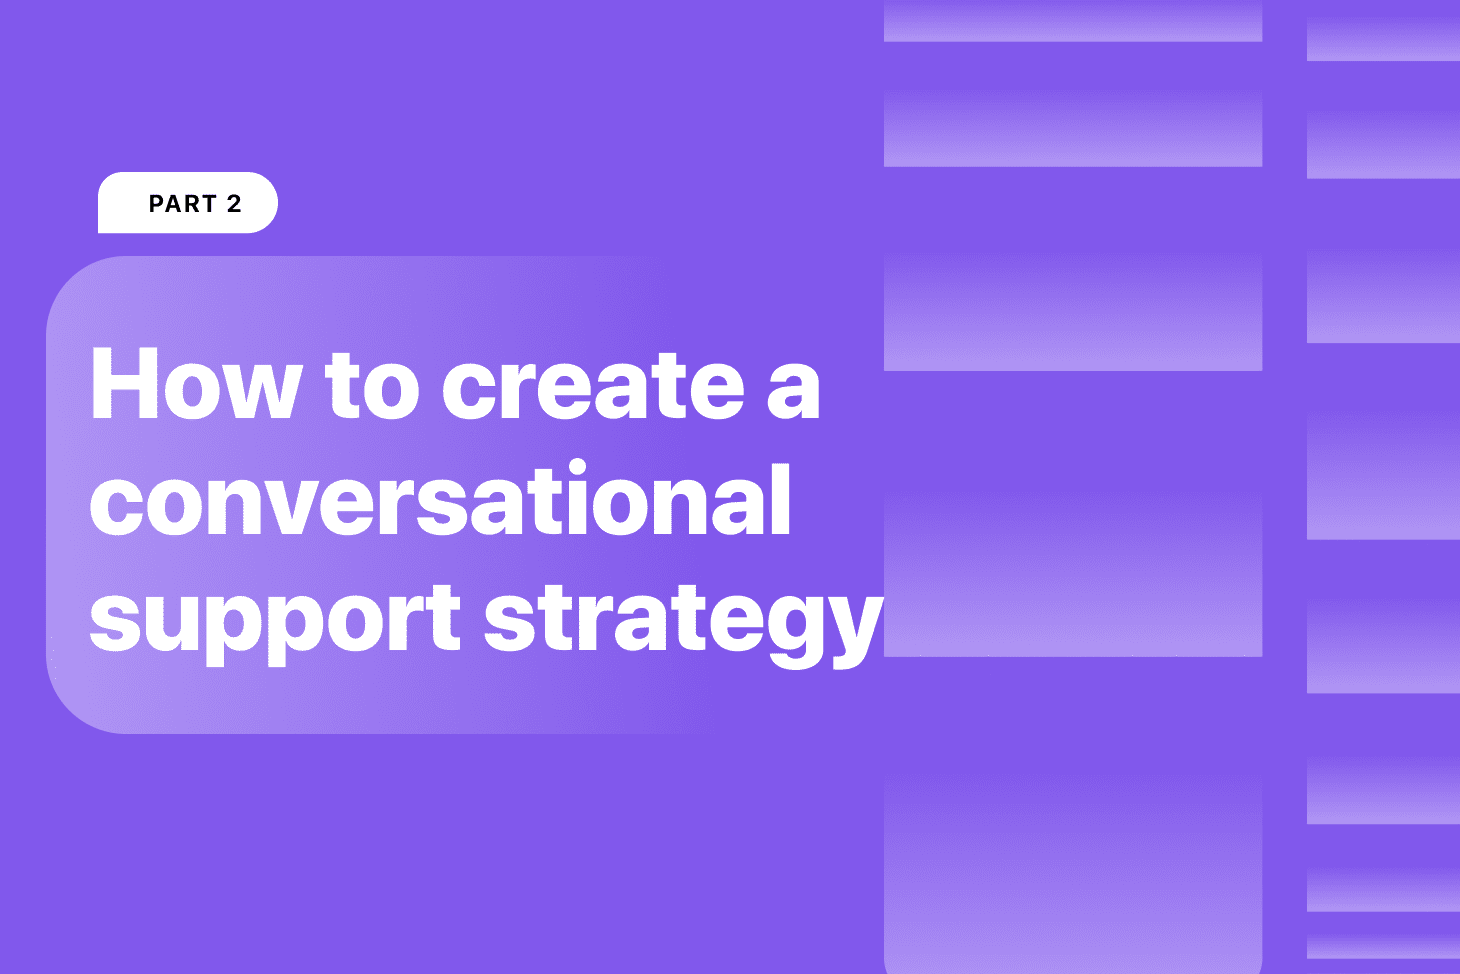 How to create a conversational support strategy